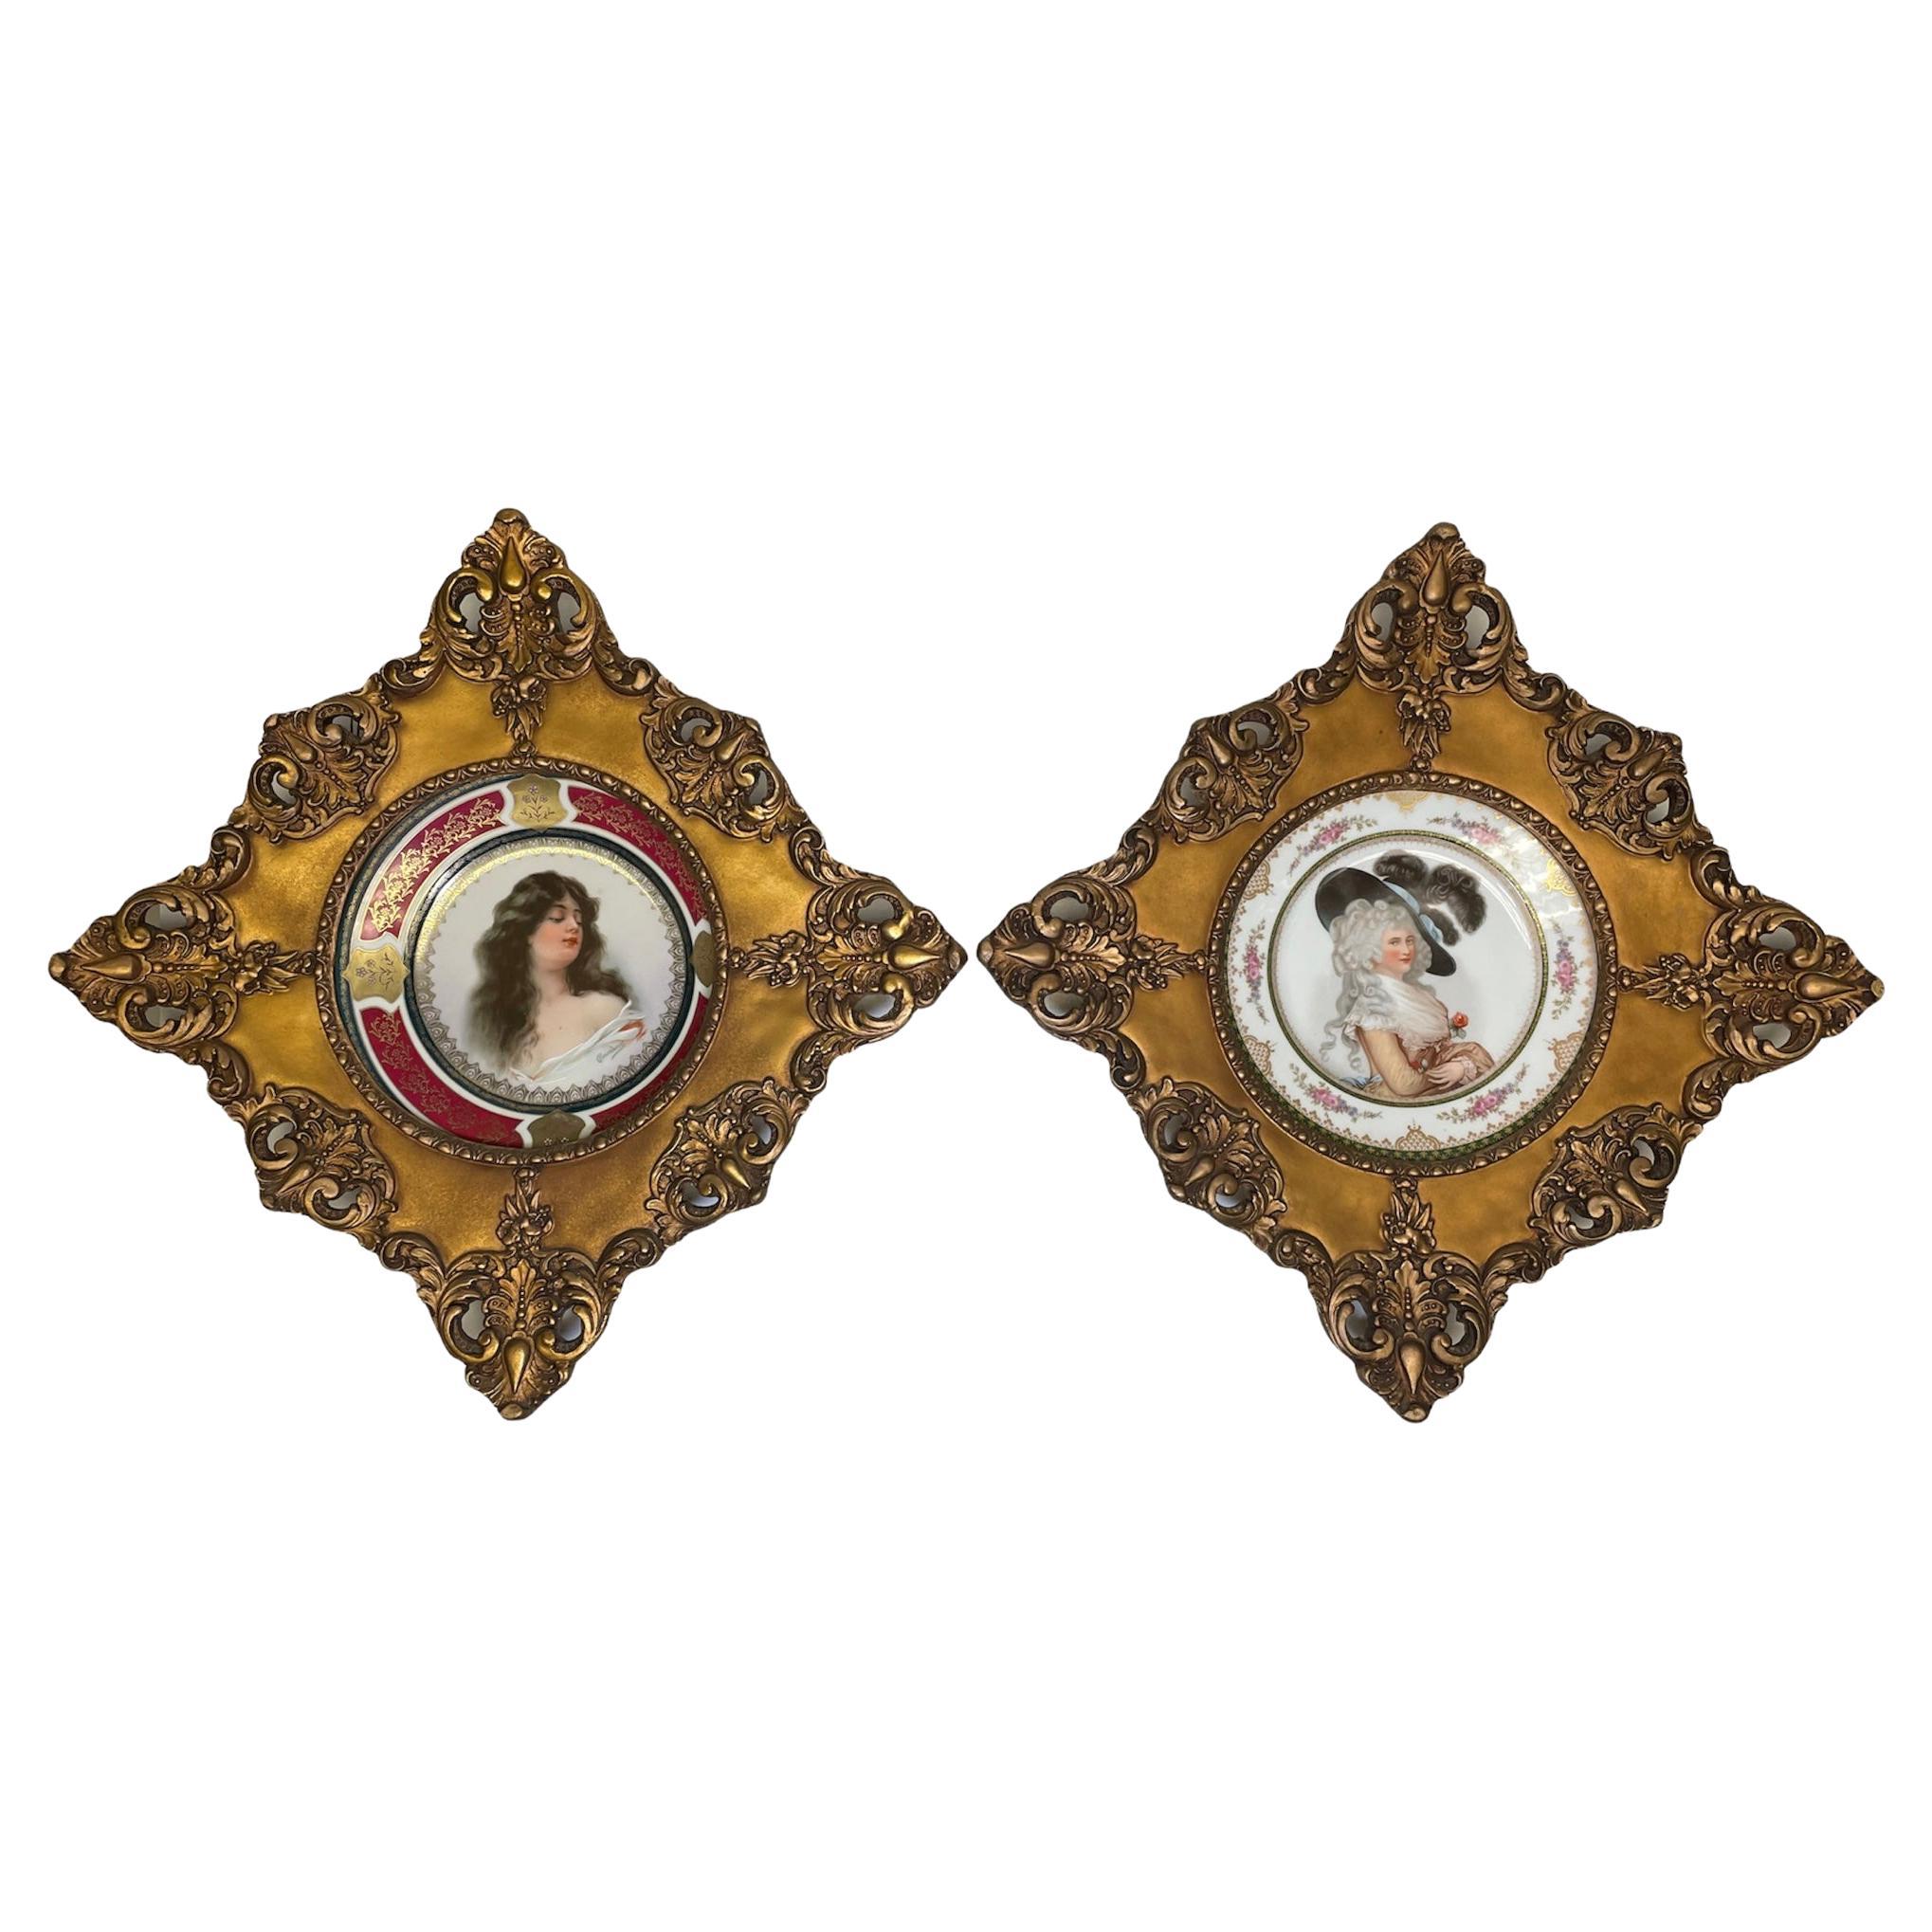 Pair of Limoges and Royal Vienna Porcelain Portraits Gilt Framed Plates